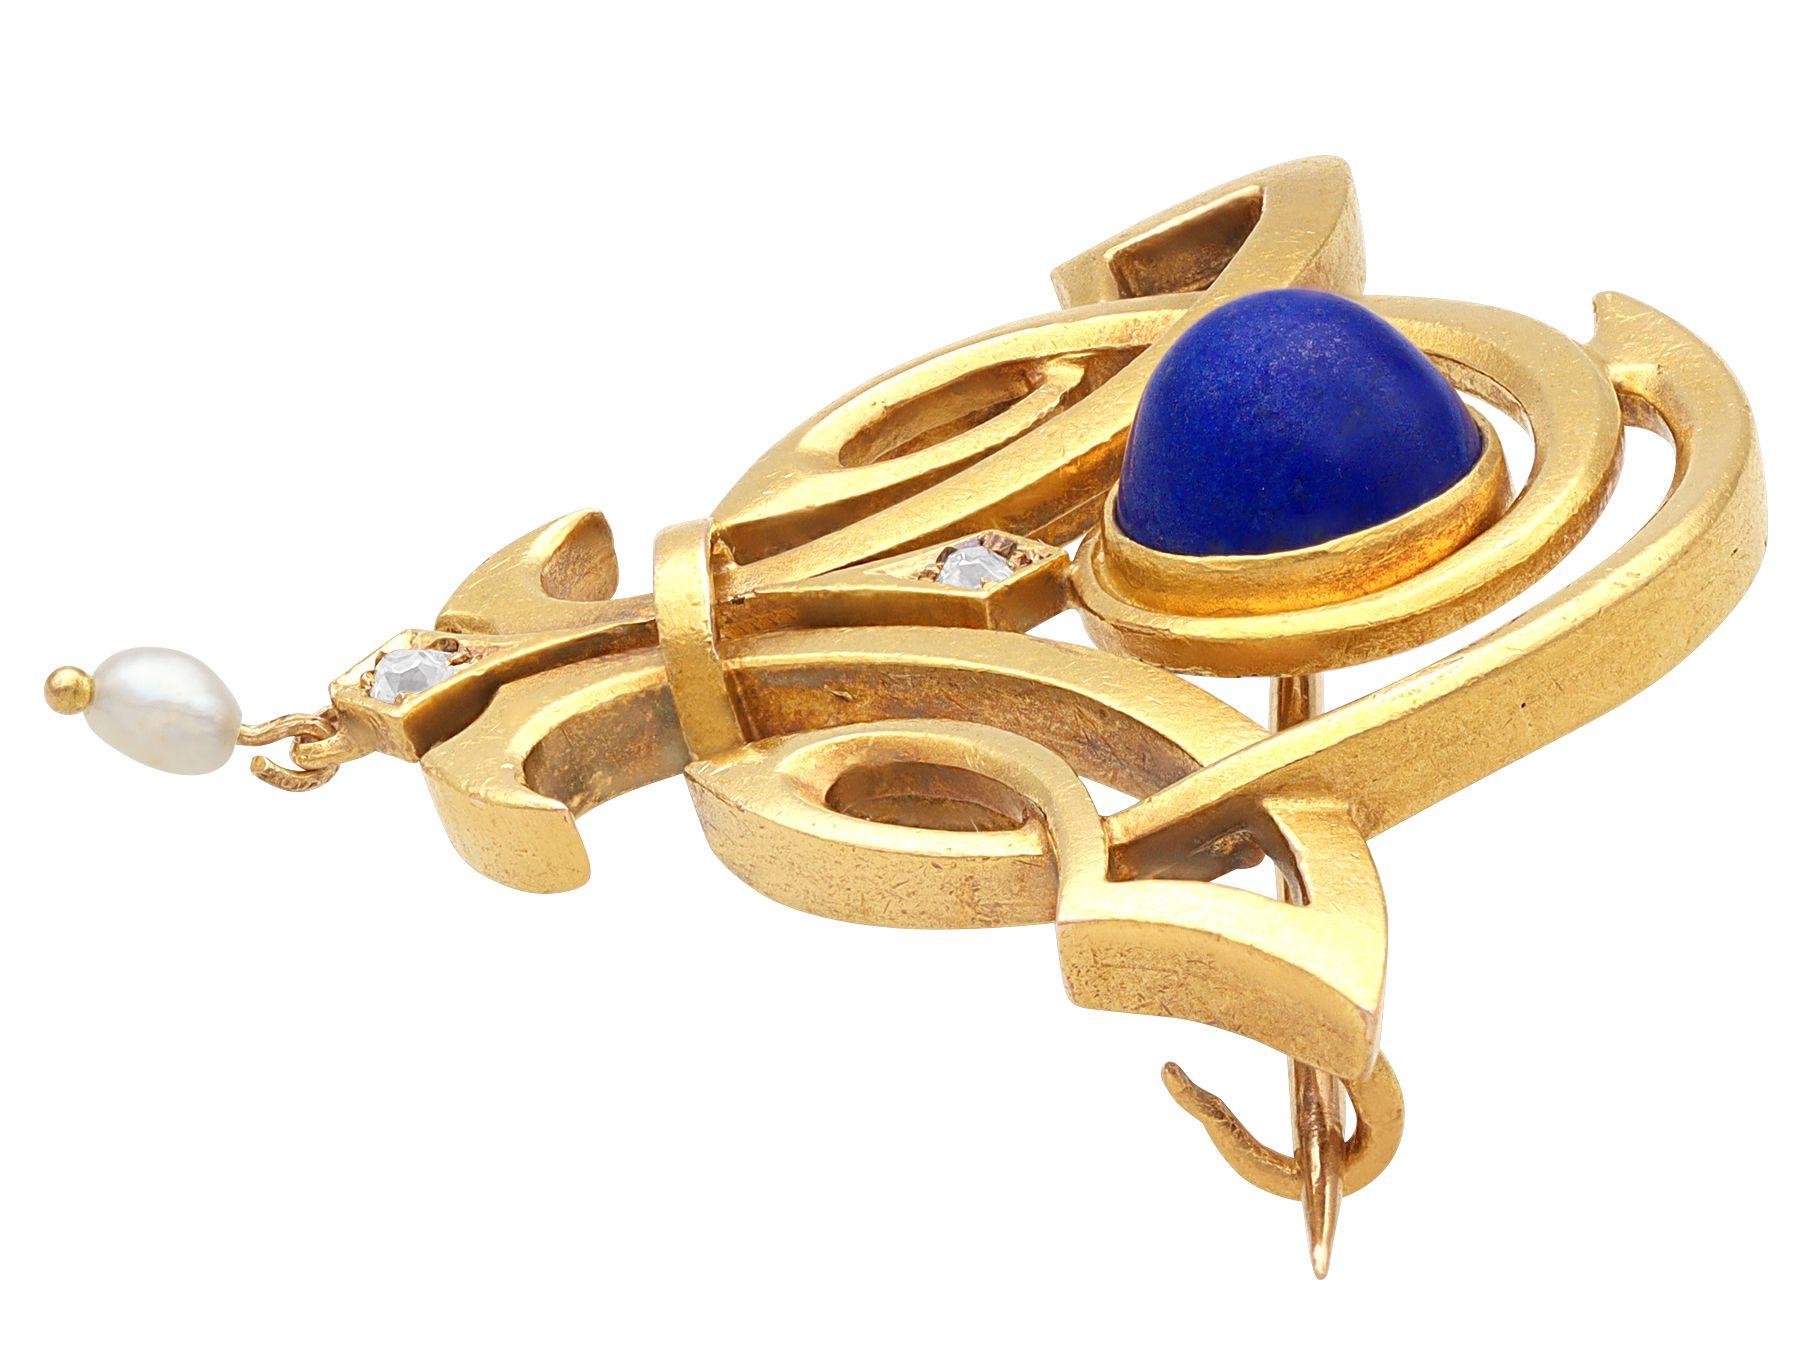 Antique Art Nouveau 1.59 Carat Lapis Lazuli Diamond Pearl Yellow Gold Brooch In Excellent Condition For Sale In Jesmond, Newcastle Upon Tyne